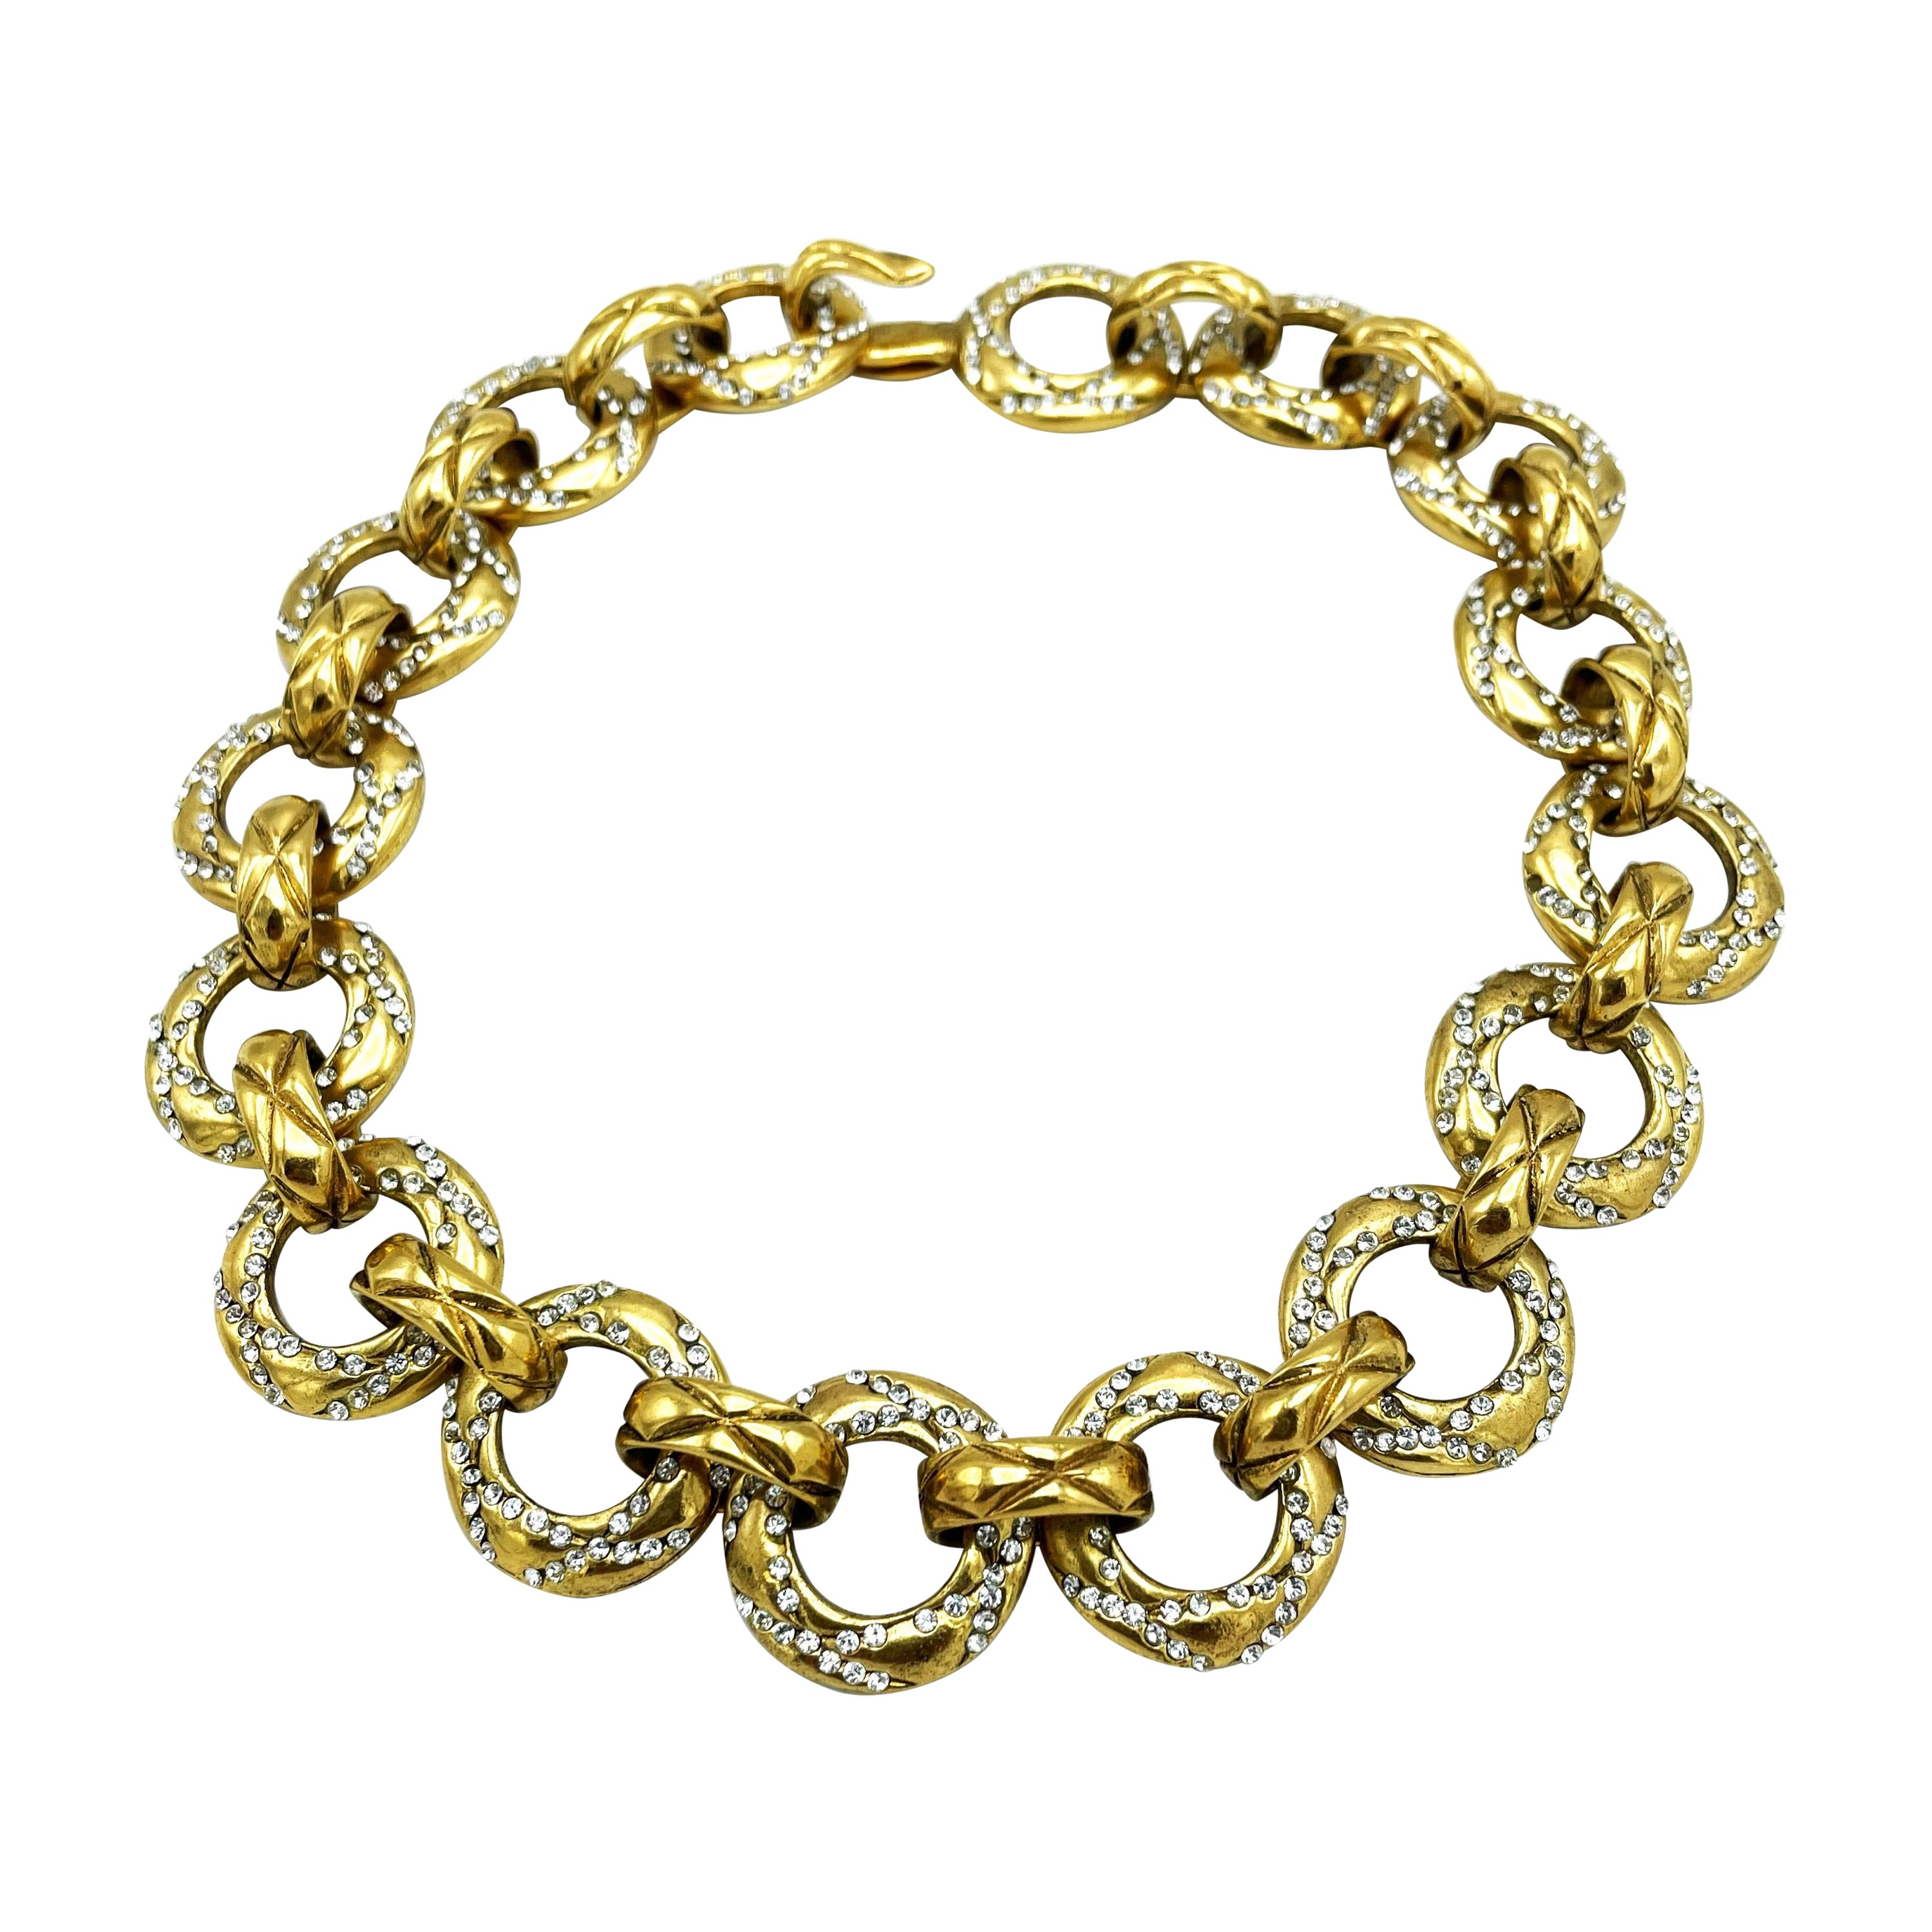 CHANEL NECKLACE BY K. LAGERFELD & V. de CASTELLANE, Crystals, gold plated 1991 